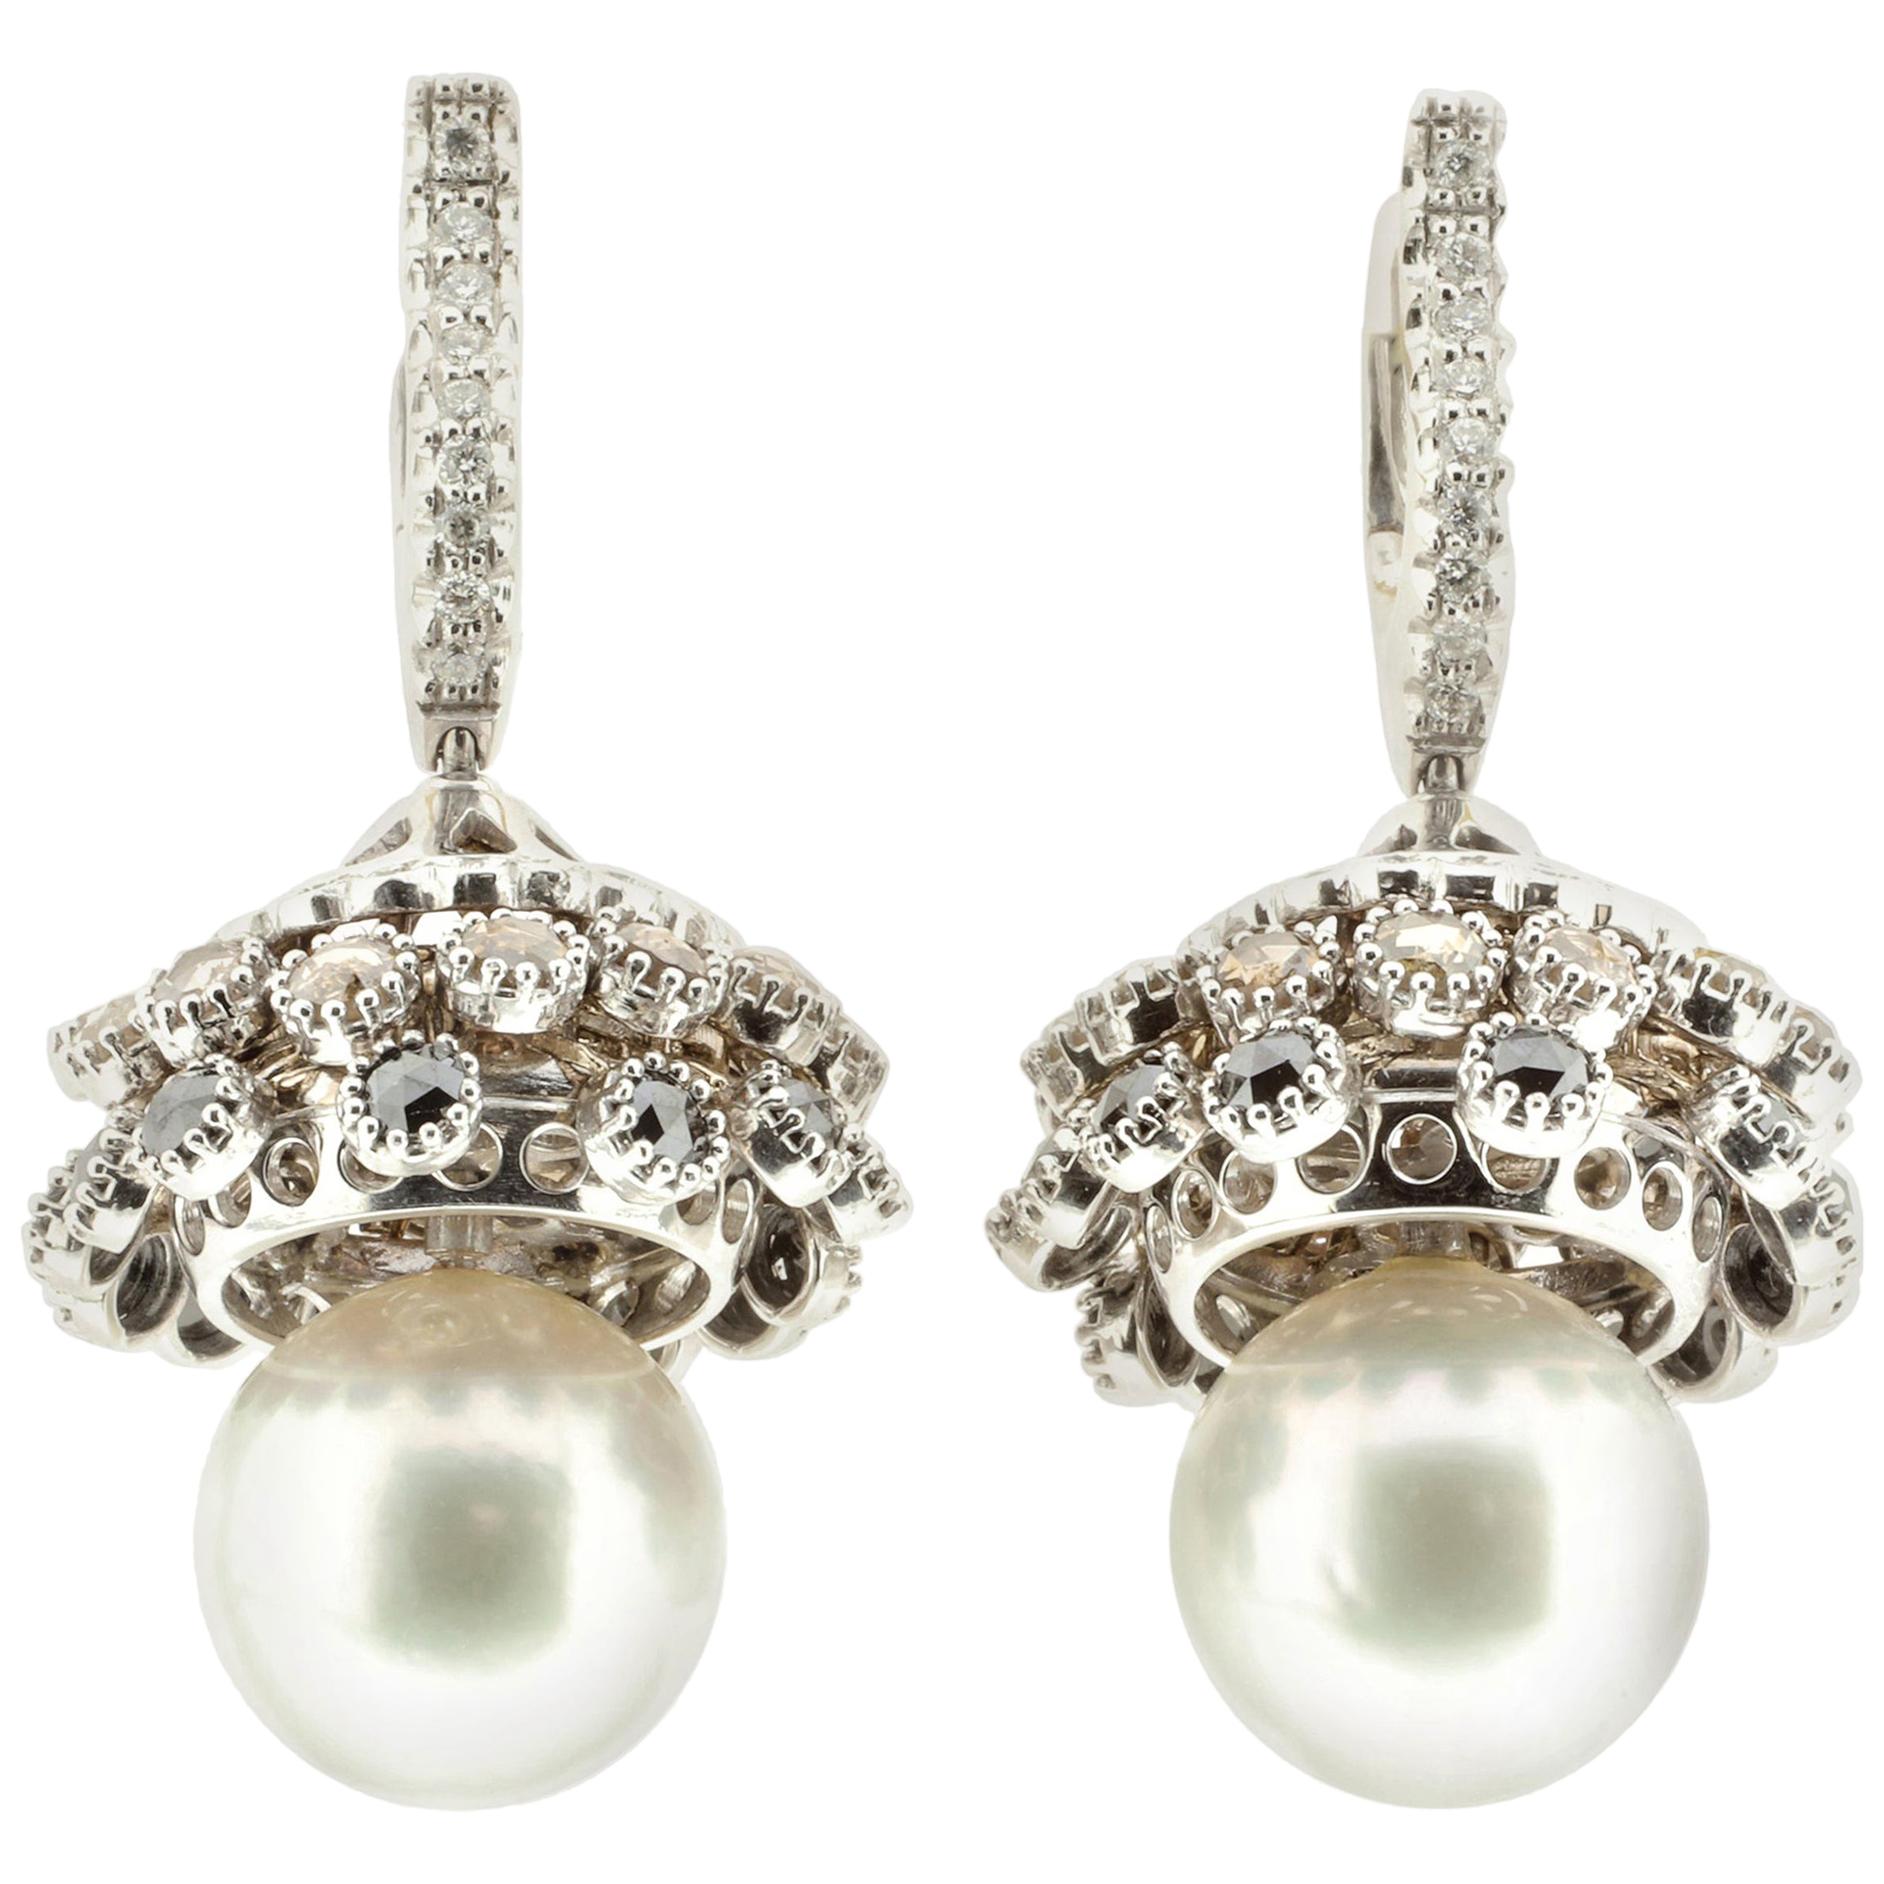 These earrings, made with two large Australian pearls, feature white diamonds rated G VS as well as rose-cut black and brown diamonds. The diamonds are set into 18-karat white gold setting, which shifts and moves with custom hinges. 

The pearls